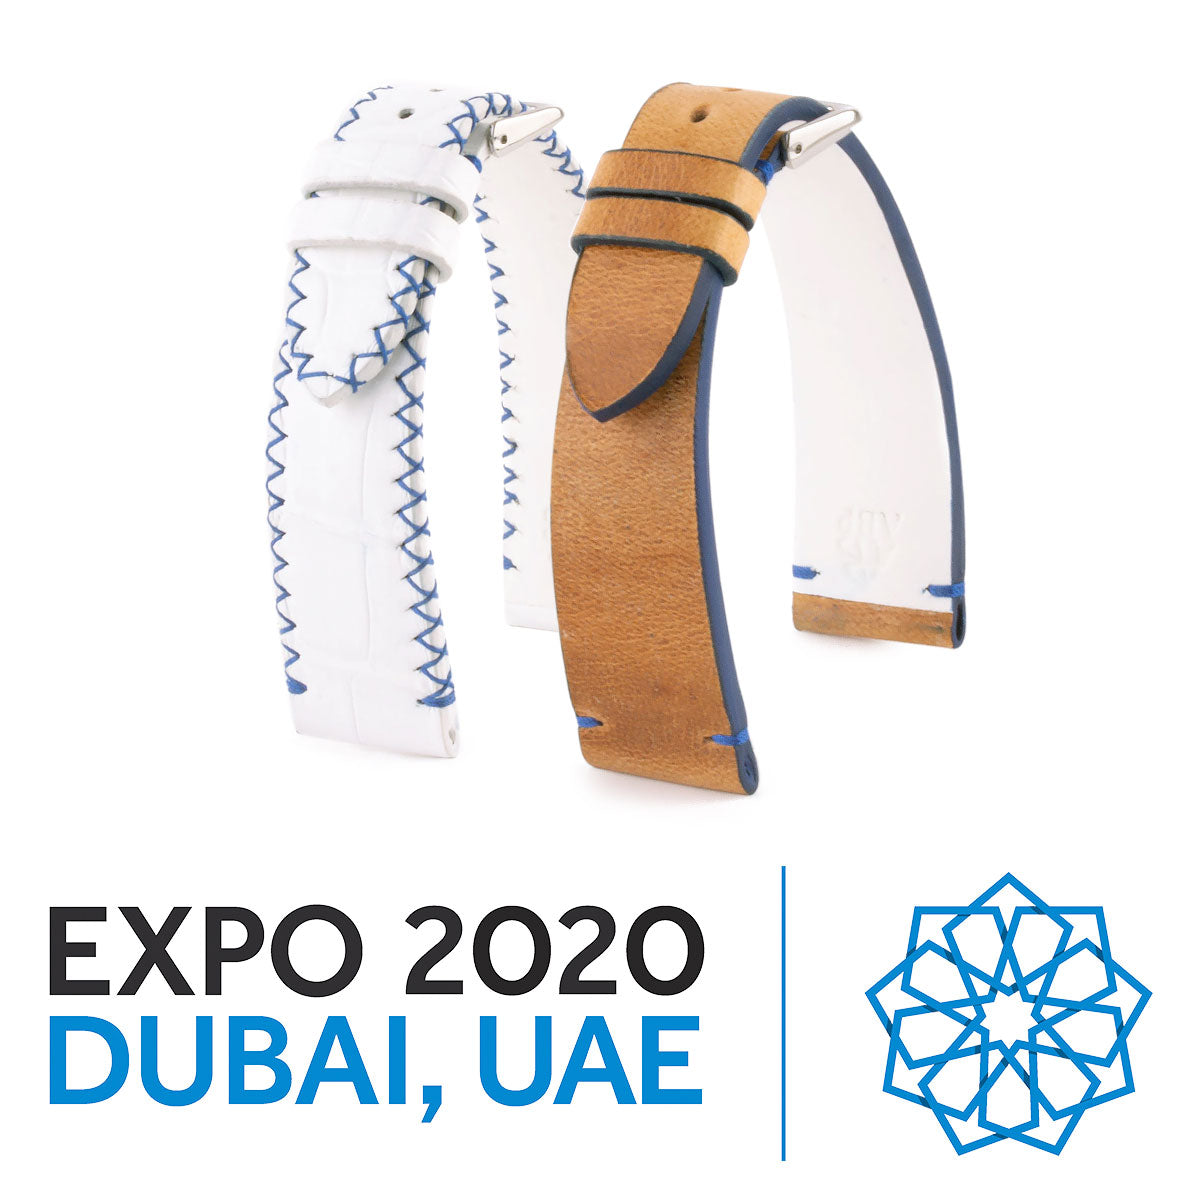 Tribute to Expo 2020 Dubai - Leather watch band - Alligator and camel (white / brown / blue)